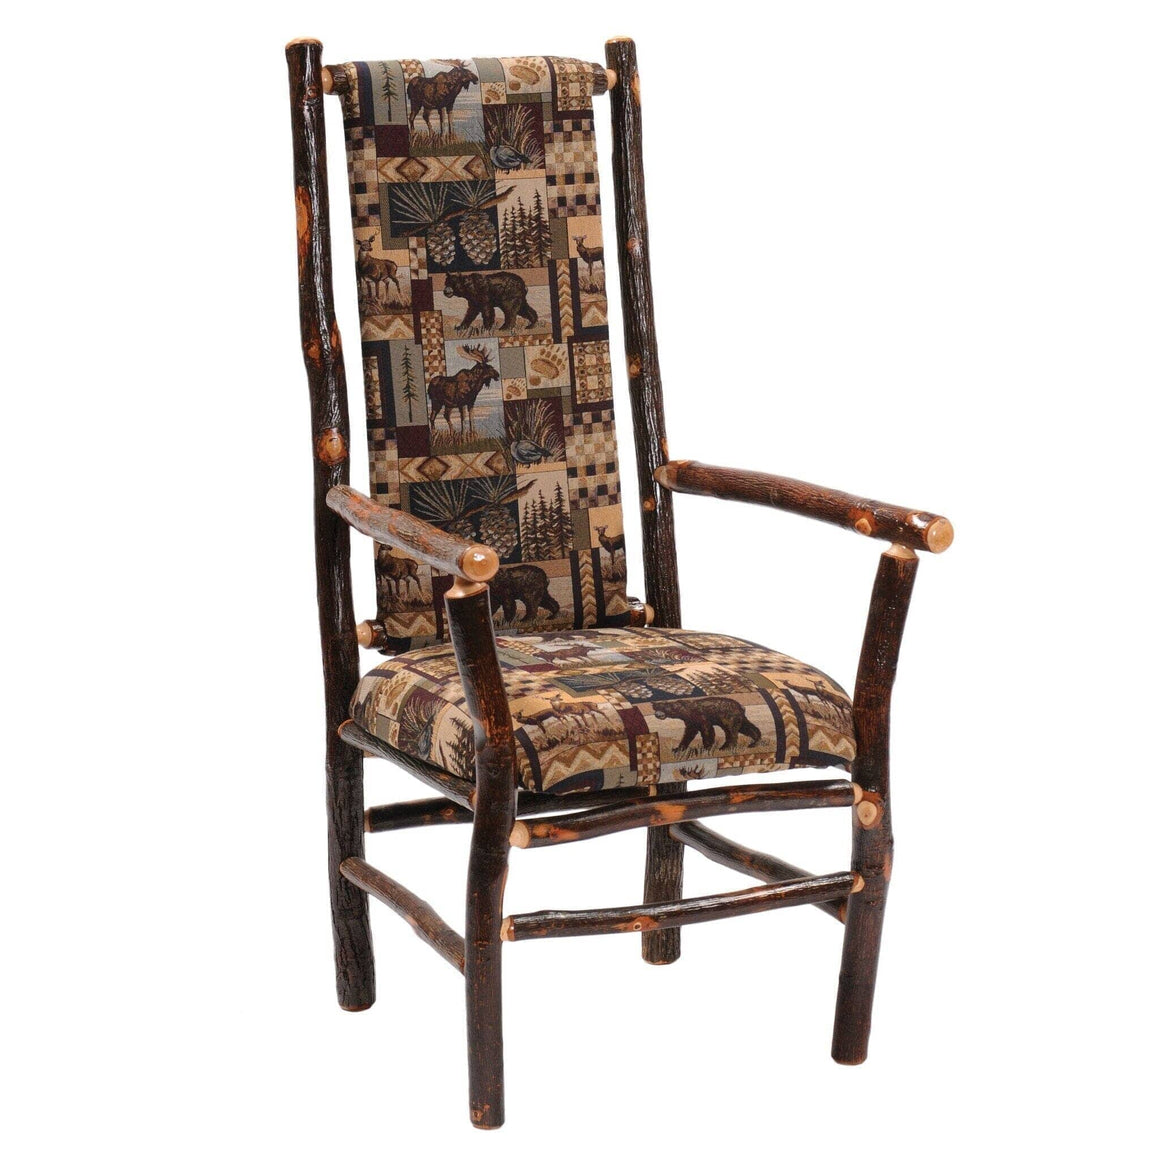 Natural Hickory Log High-back Upholstered Arm Chair - Standard Finish - Rustic Deco Incorporated